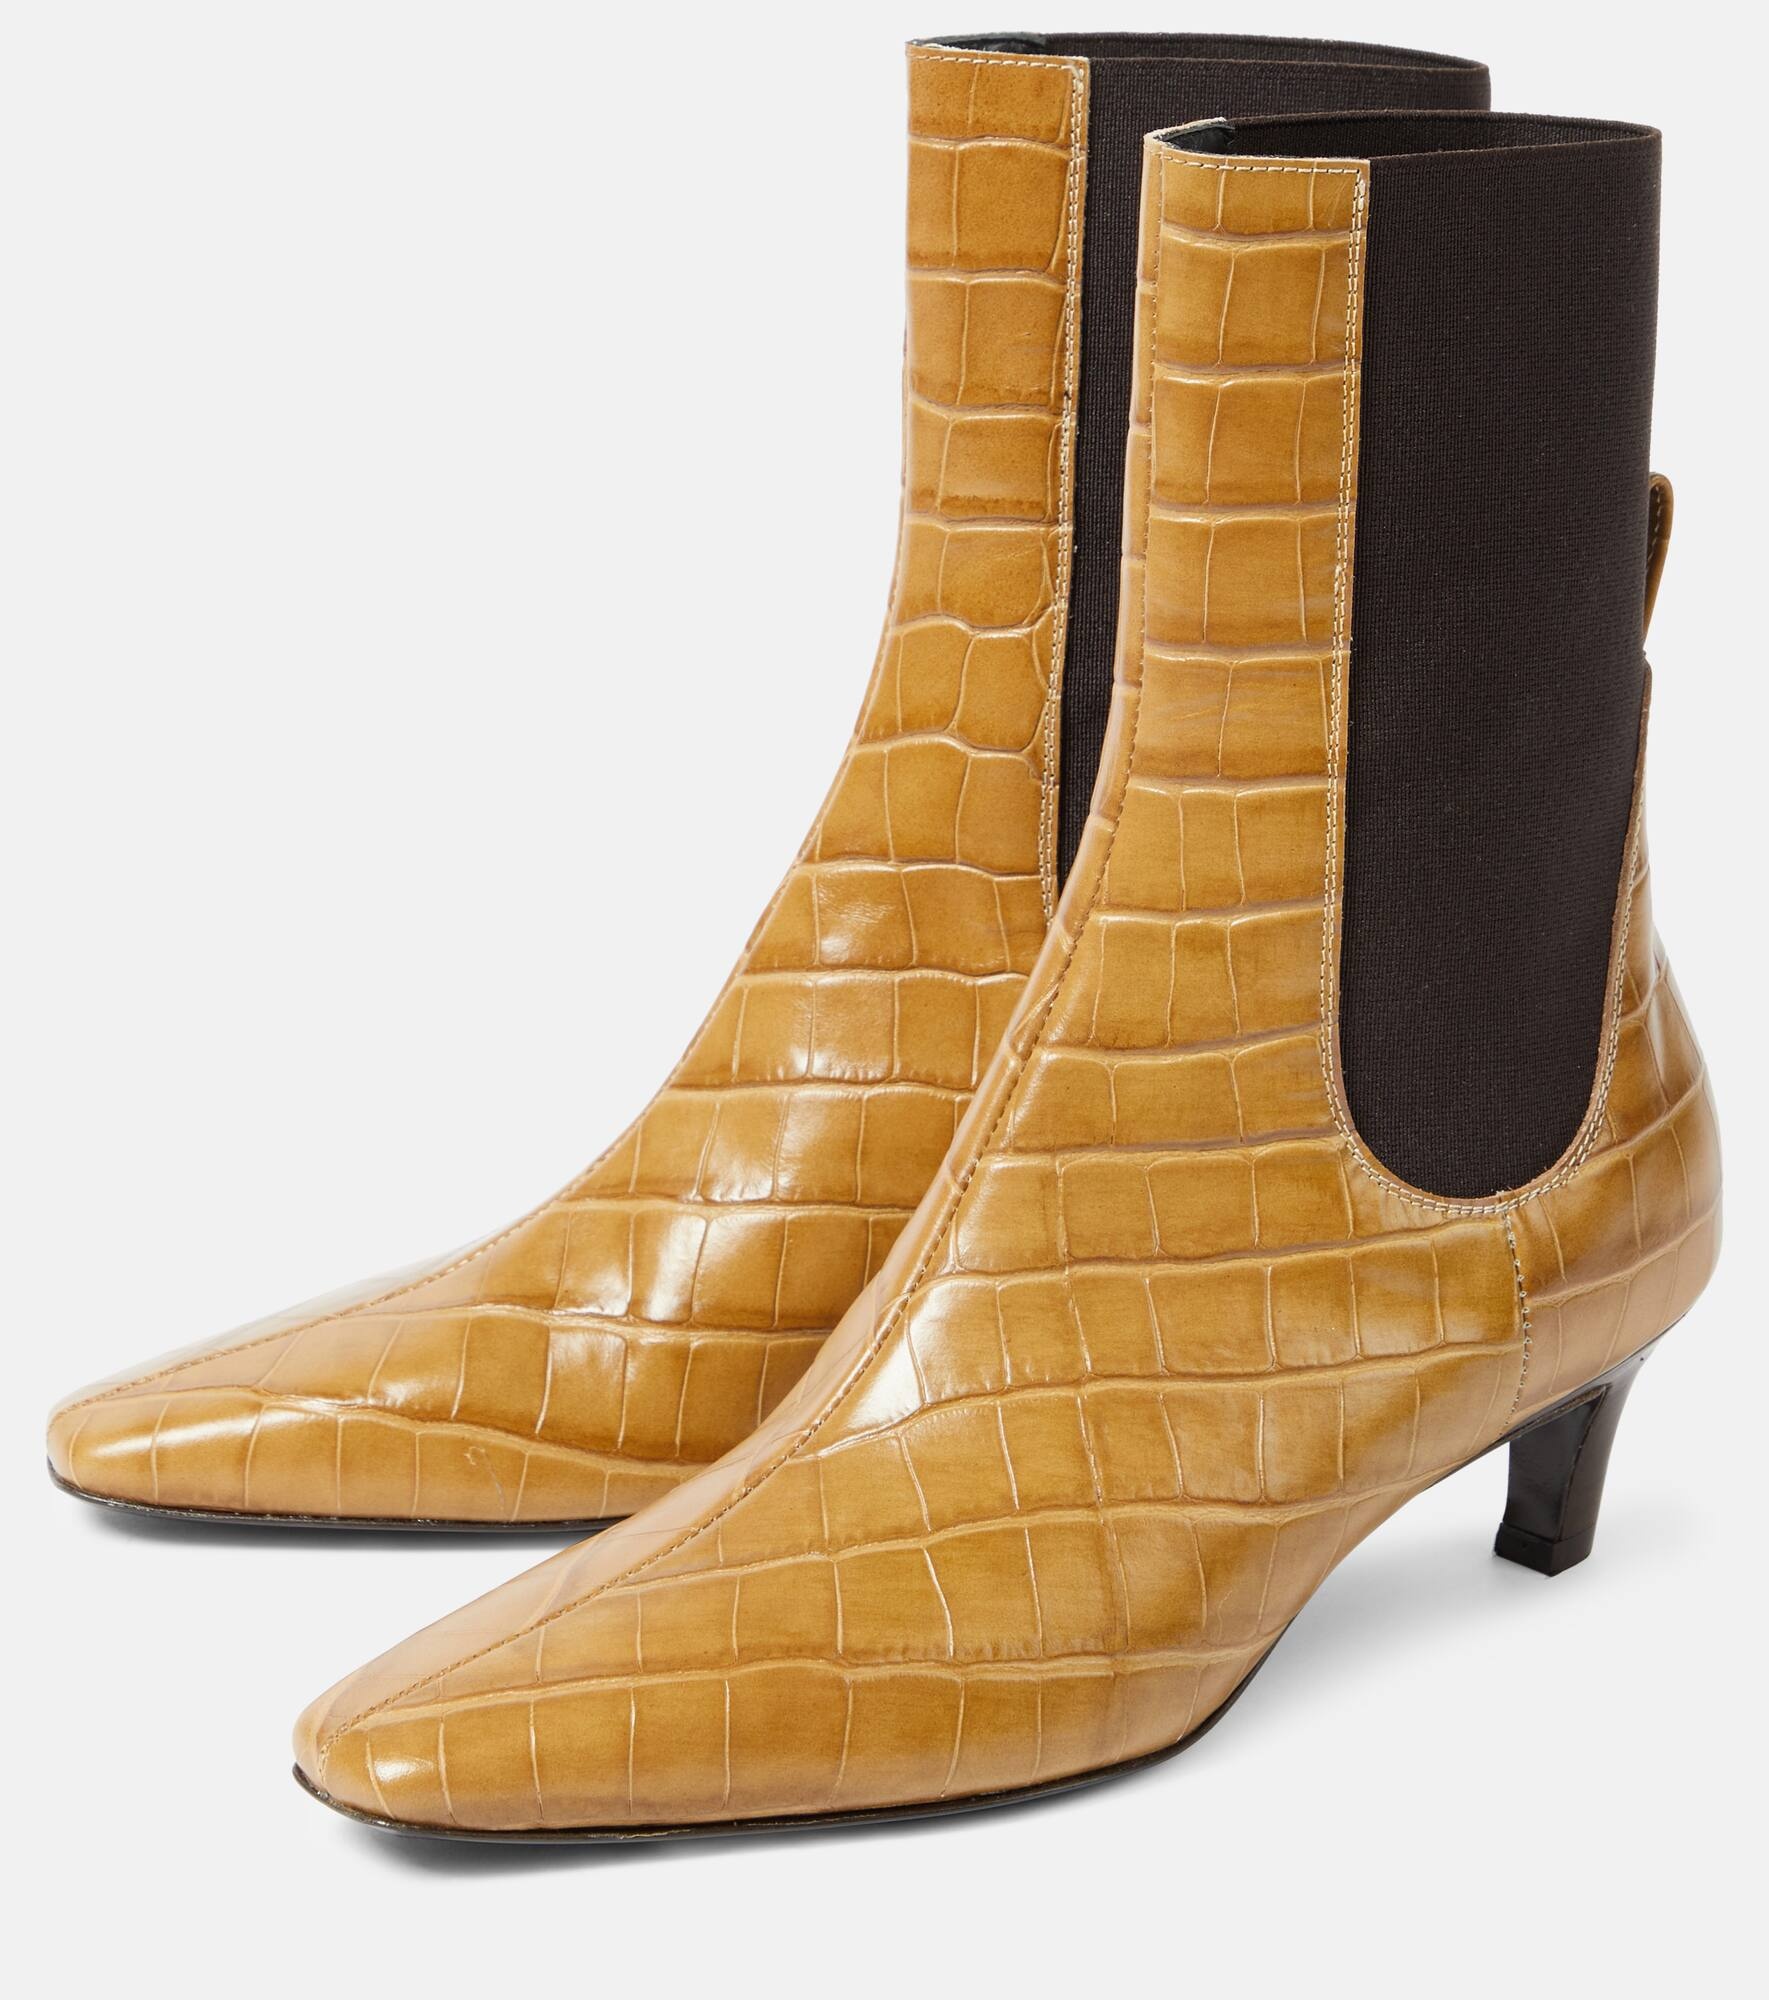 The Mid Heel croc-effect leather ankle boots - 5